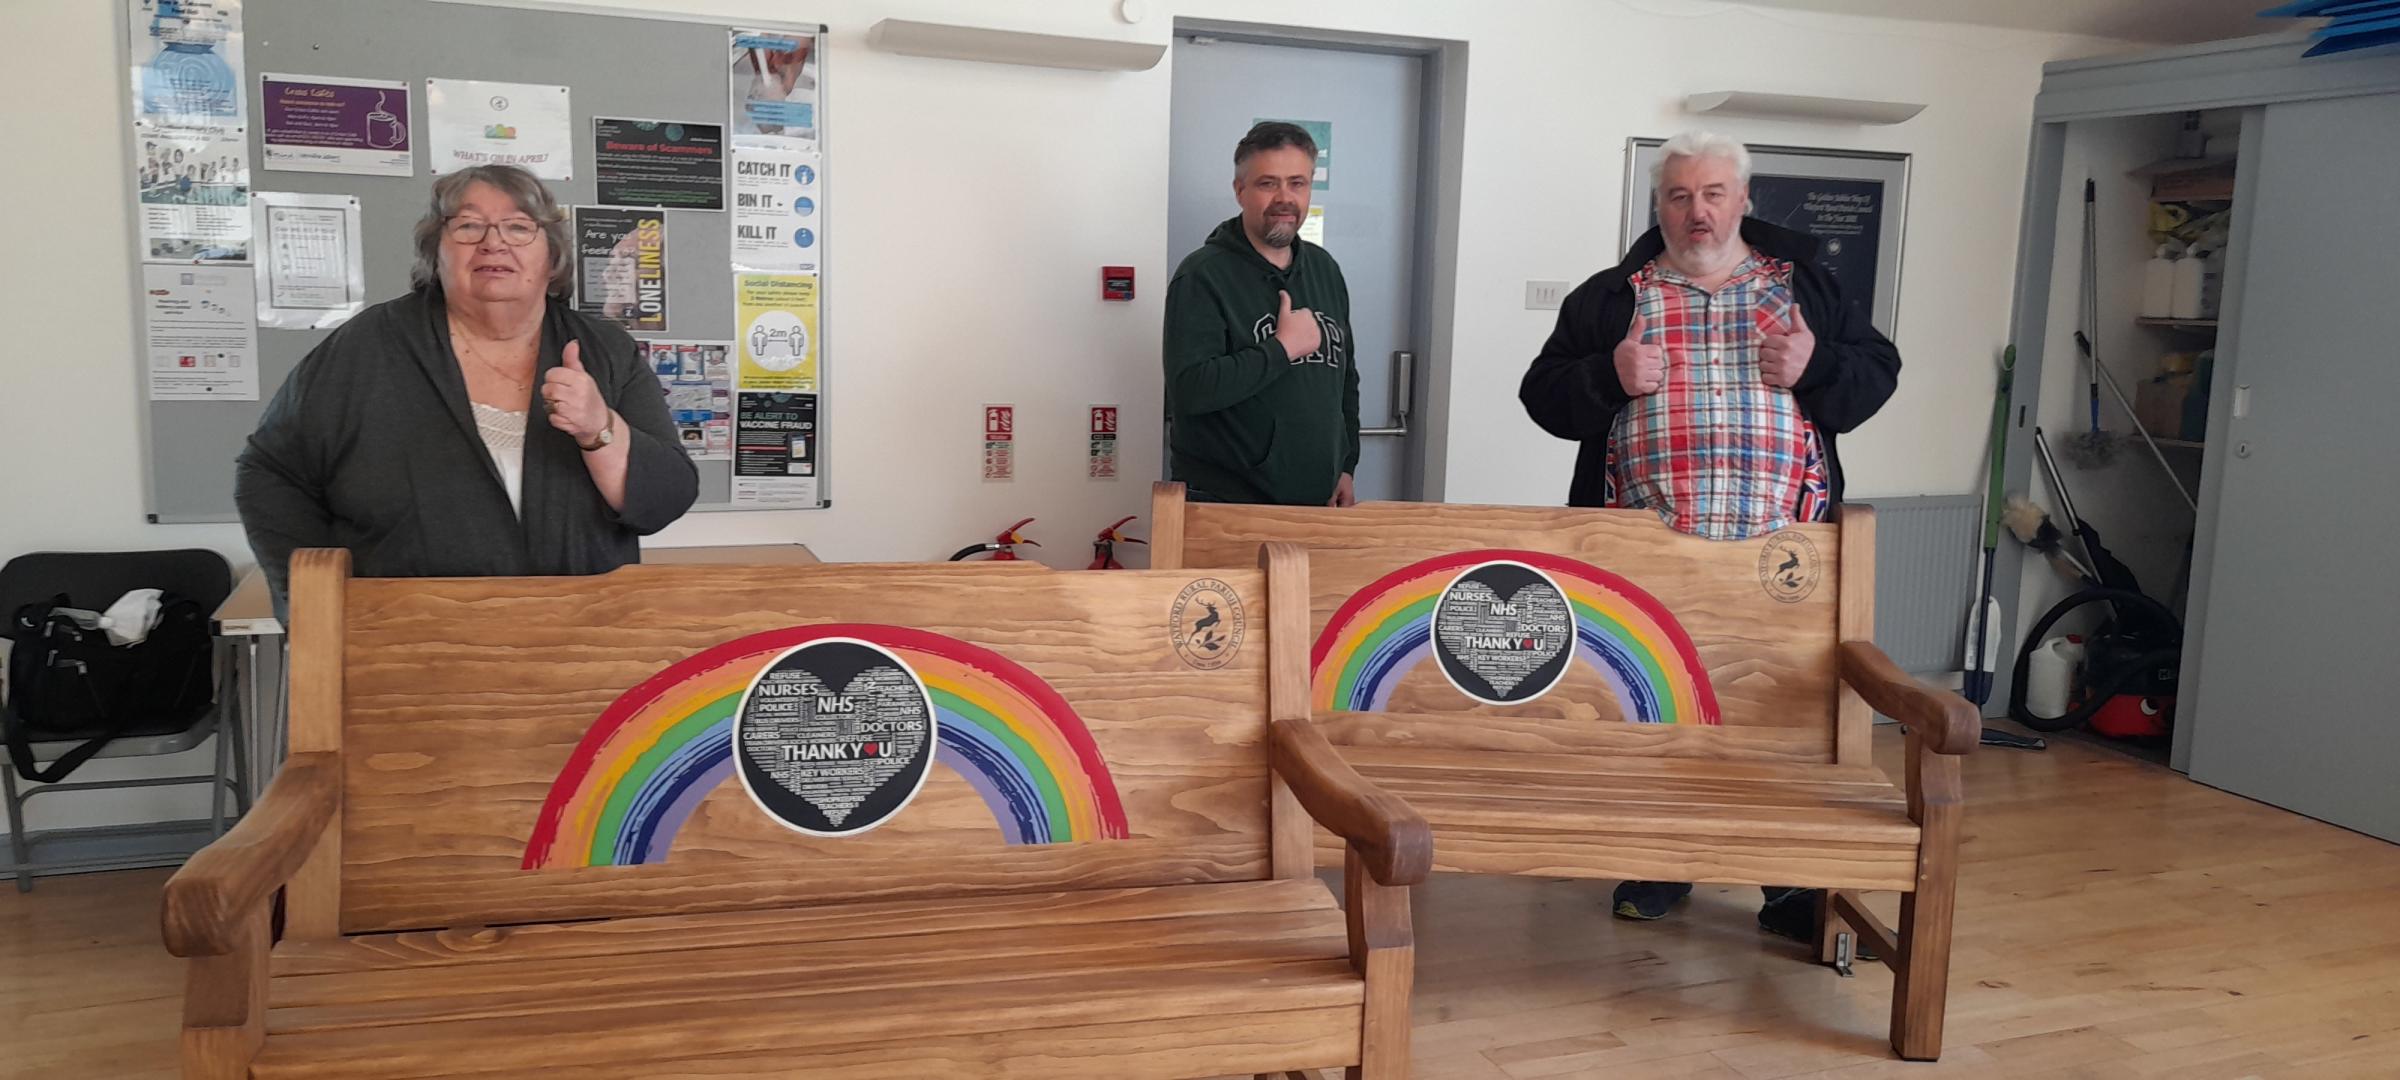 The benches will be installed in South Oxhey and Carpenders Park